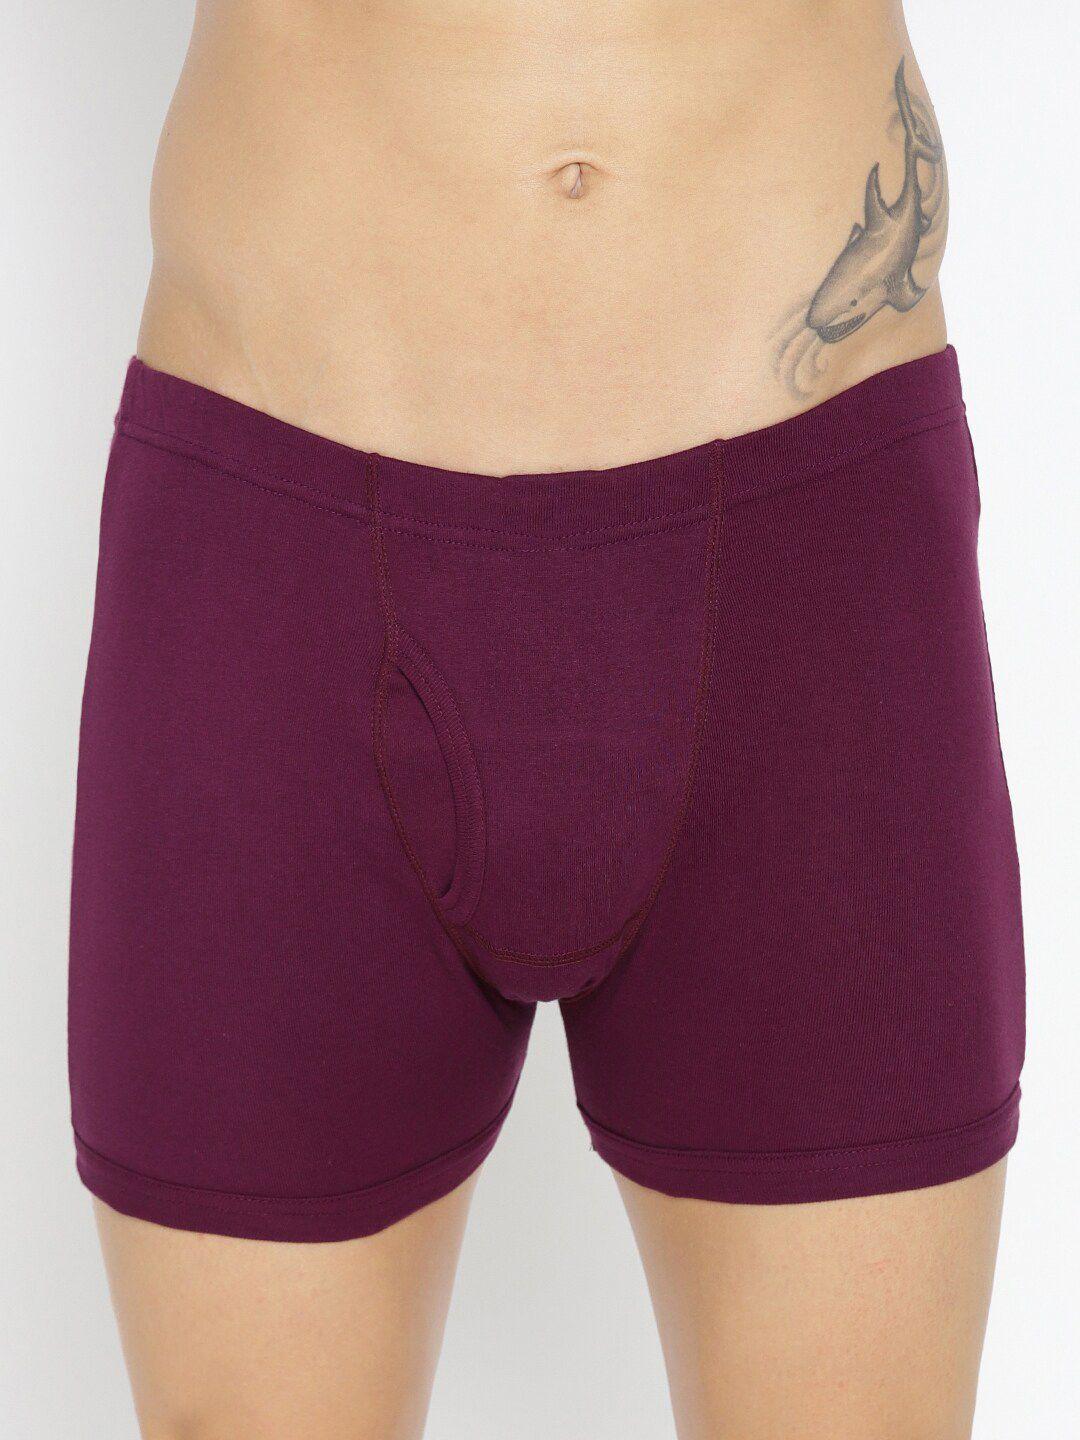 the roadster lifestyle co. burgundy mid rise breathable cotton trunks rtie-1004-wn-1